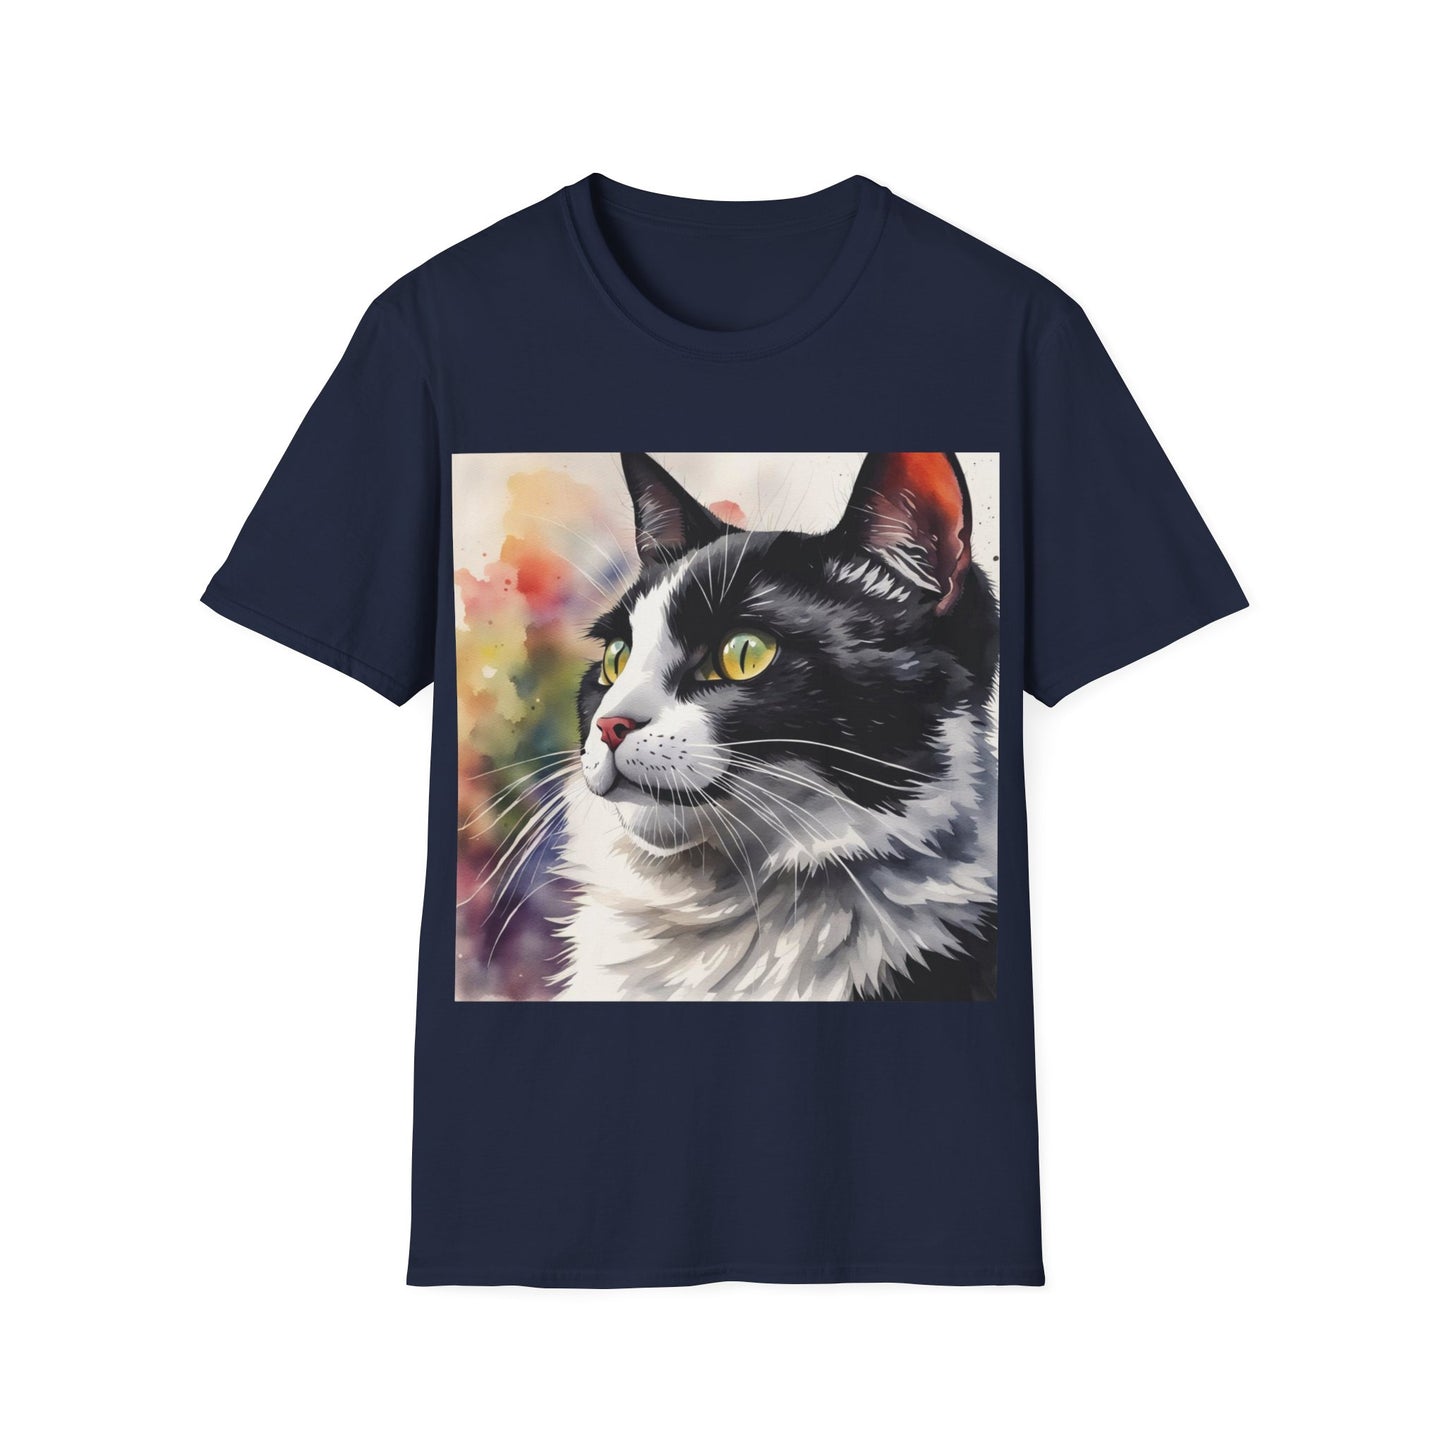 Black And White Cat Cute Watercolor T-Shirt